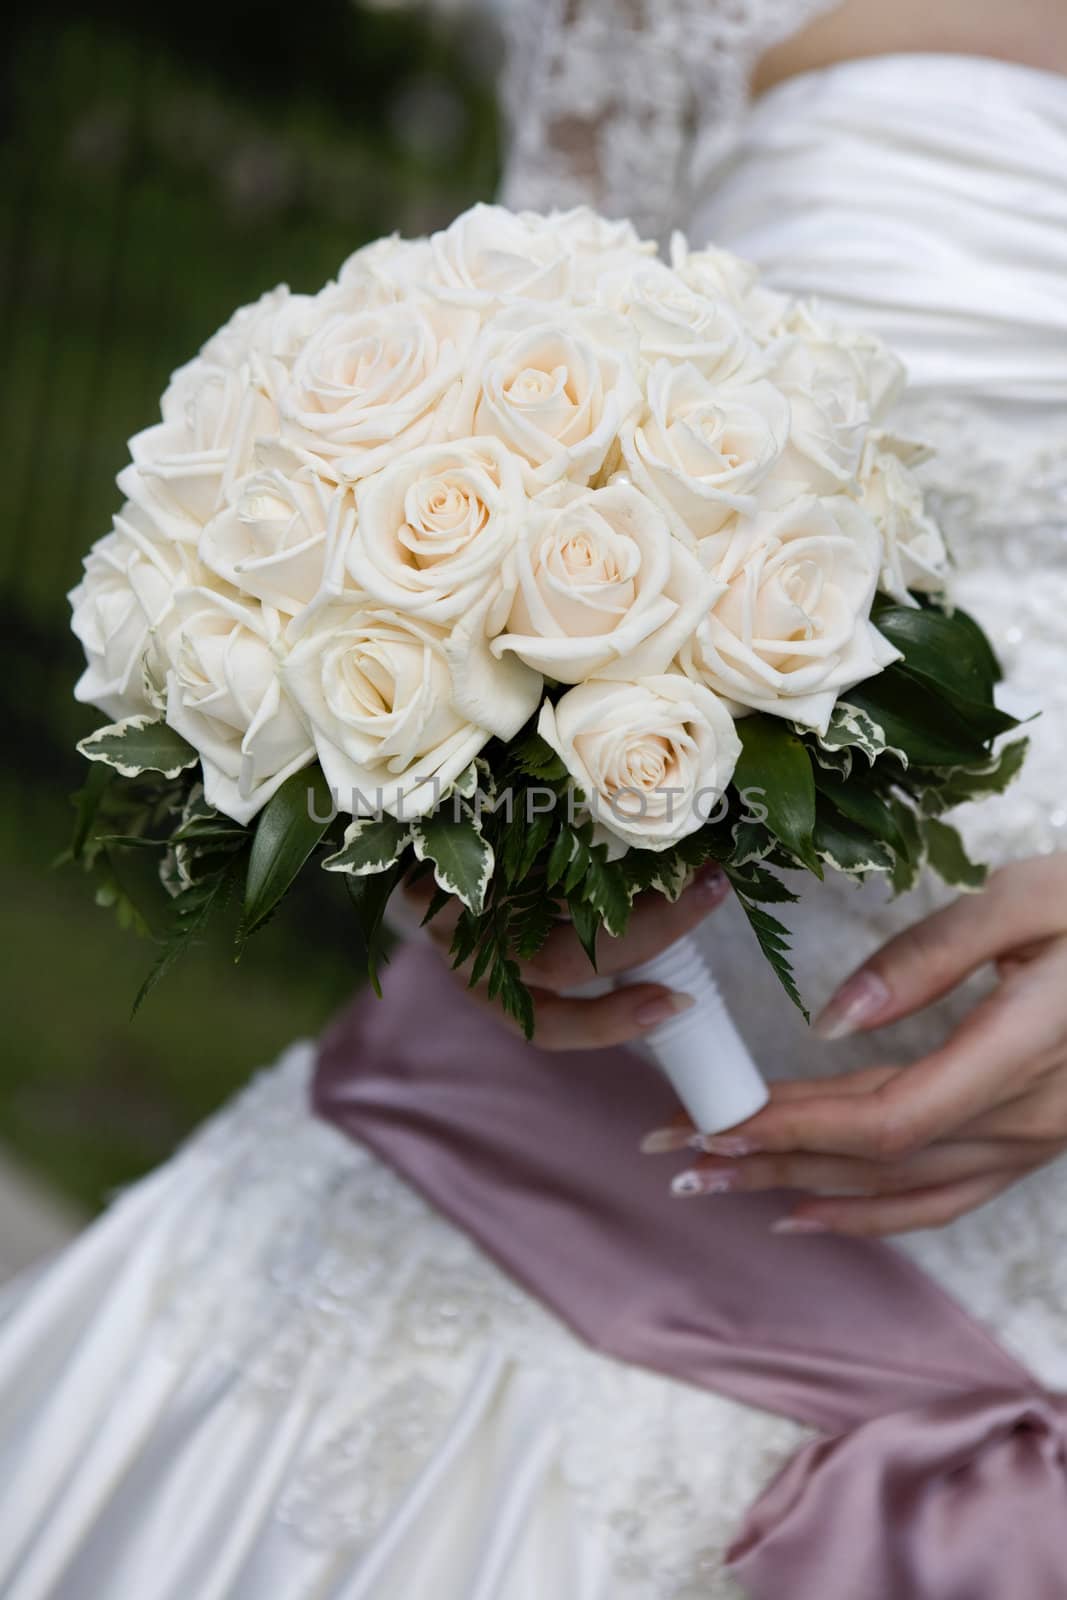 Bride in dress holding beautiful bouquet of rose